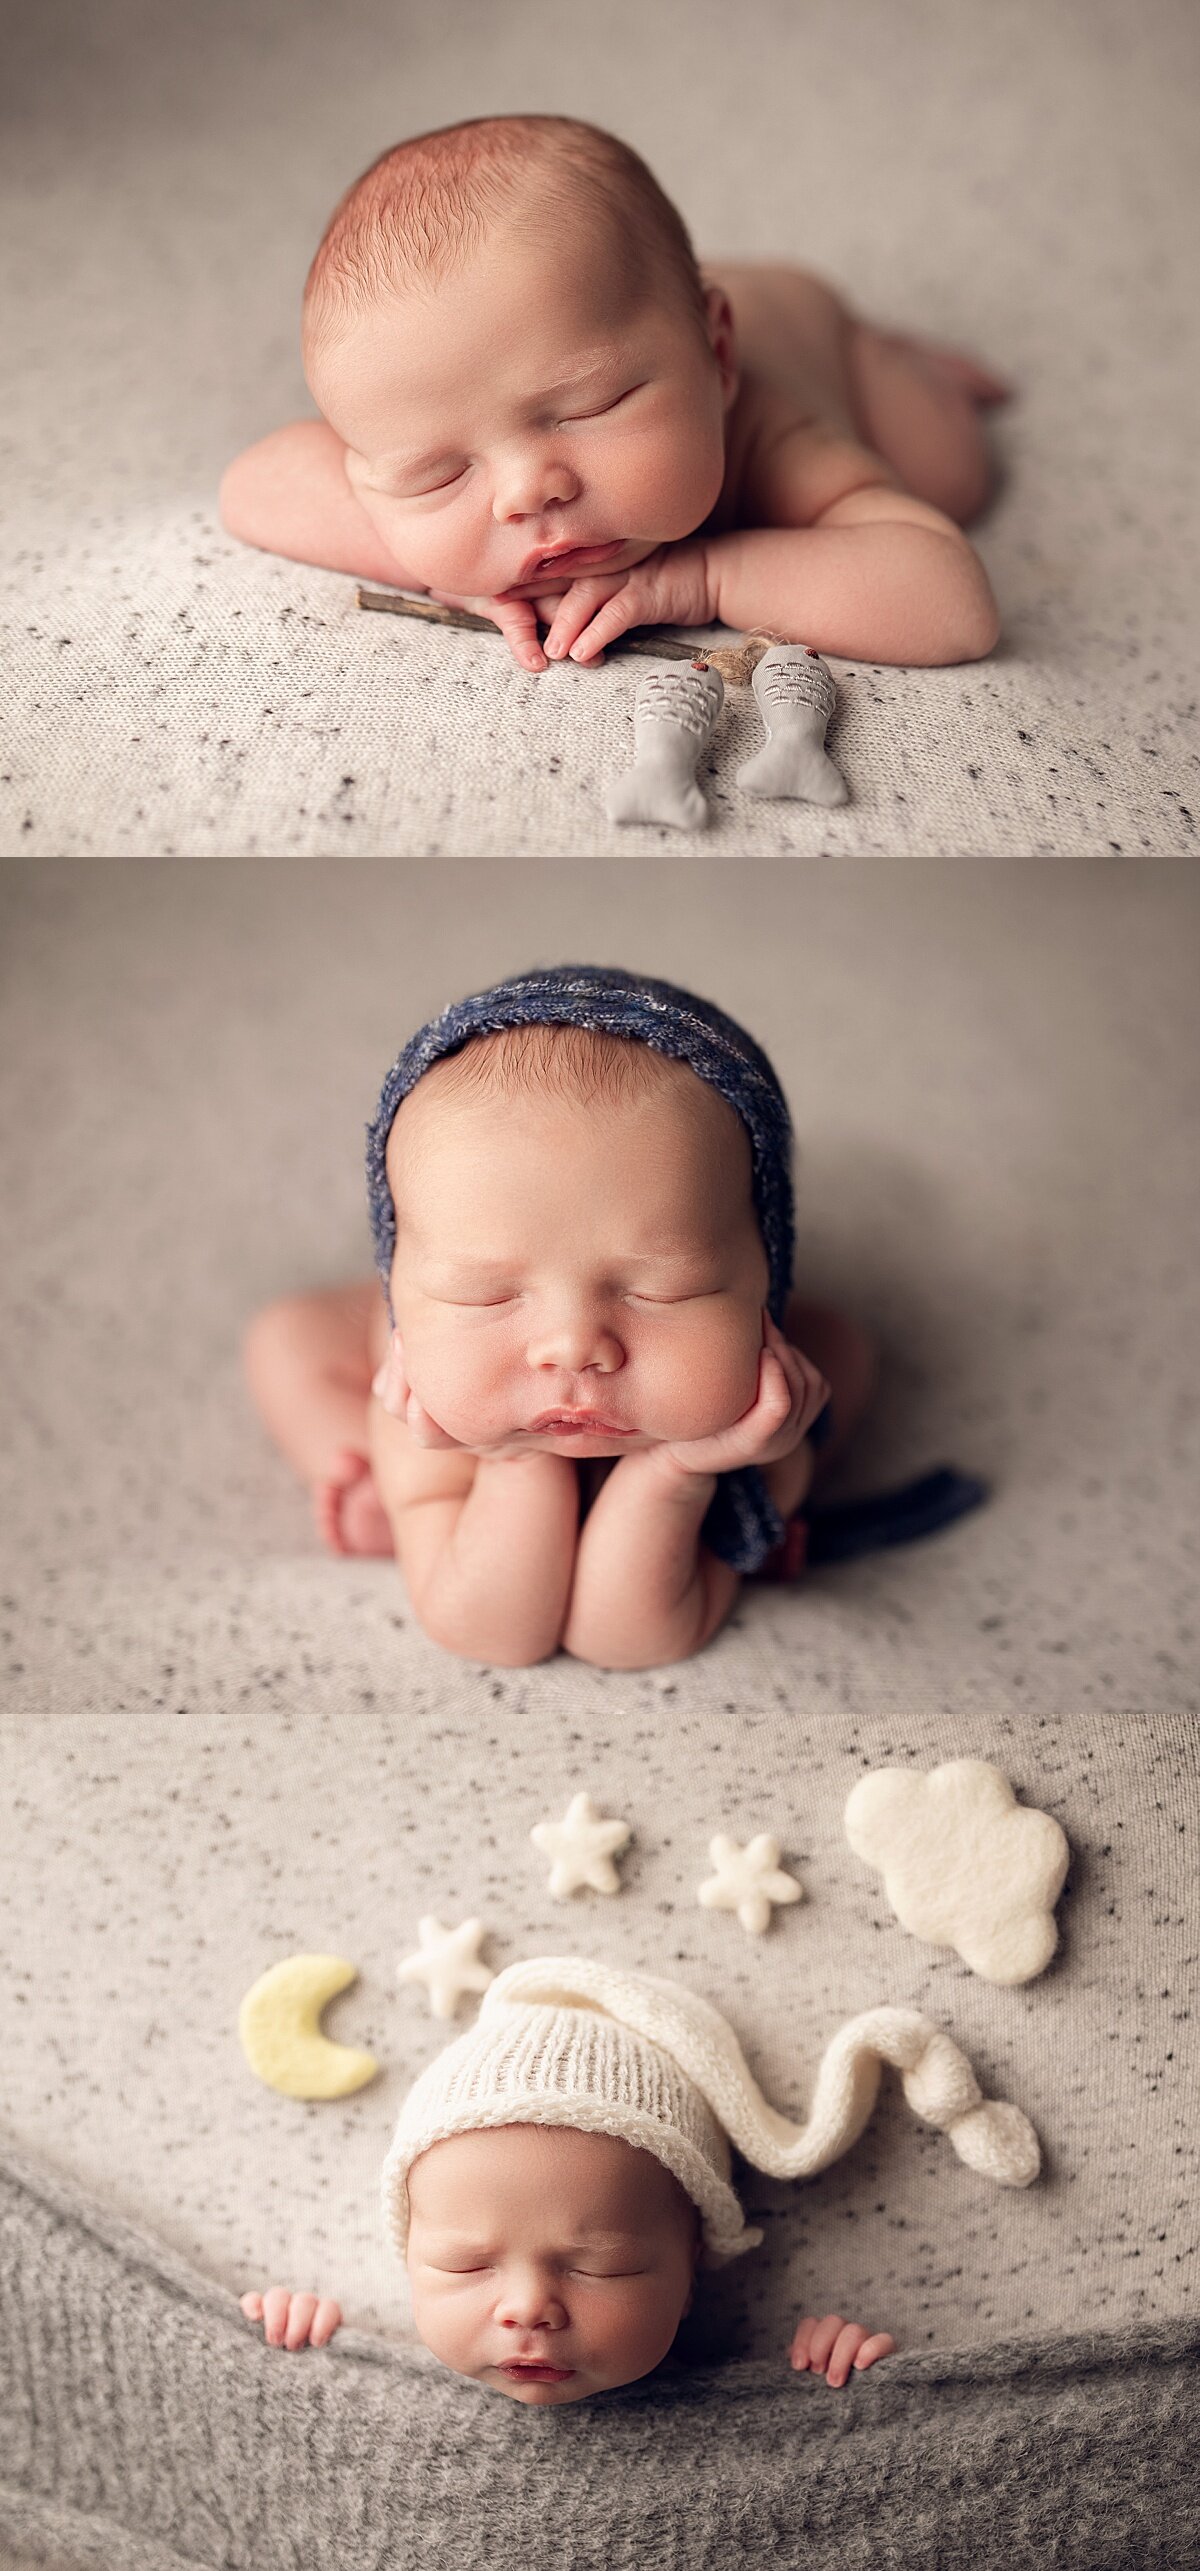 https://images.squarespace-cdn.com/content/v1/5f3d3a1ffaeec337e0535172/1626932138000-V9ZJNJ5502P2ZWS9GWR2/newborn+holding+fishing+pole+prop%2C+froggy+pose%2C+chin+on+hands+pose%2C+red+hair+newborn%2C+redhead+newborn+boy%2C+sleepy+poe+with+moon+and+cloud+props%2C+newborn+tucked+in